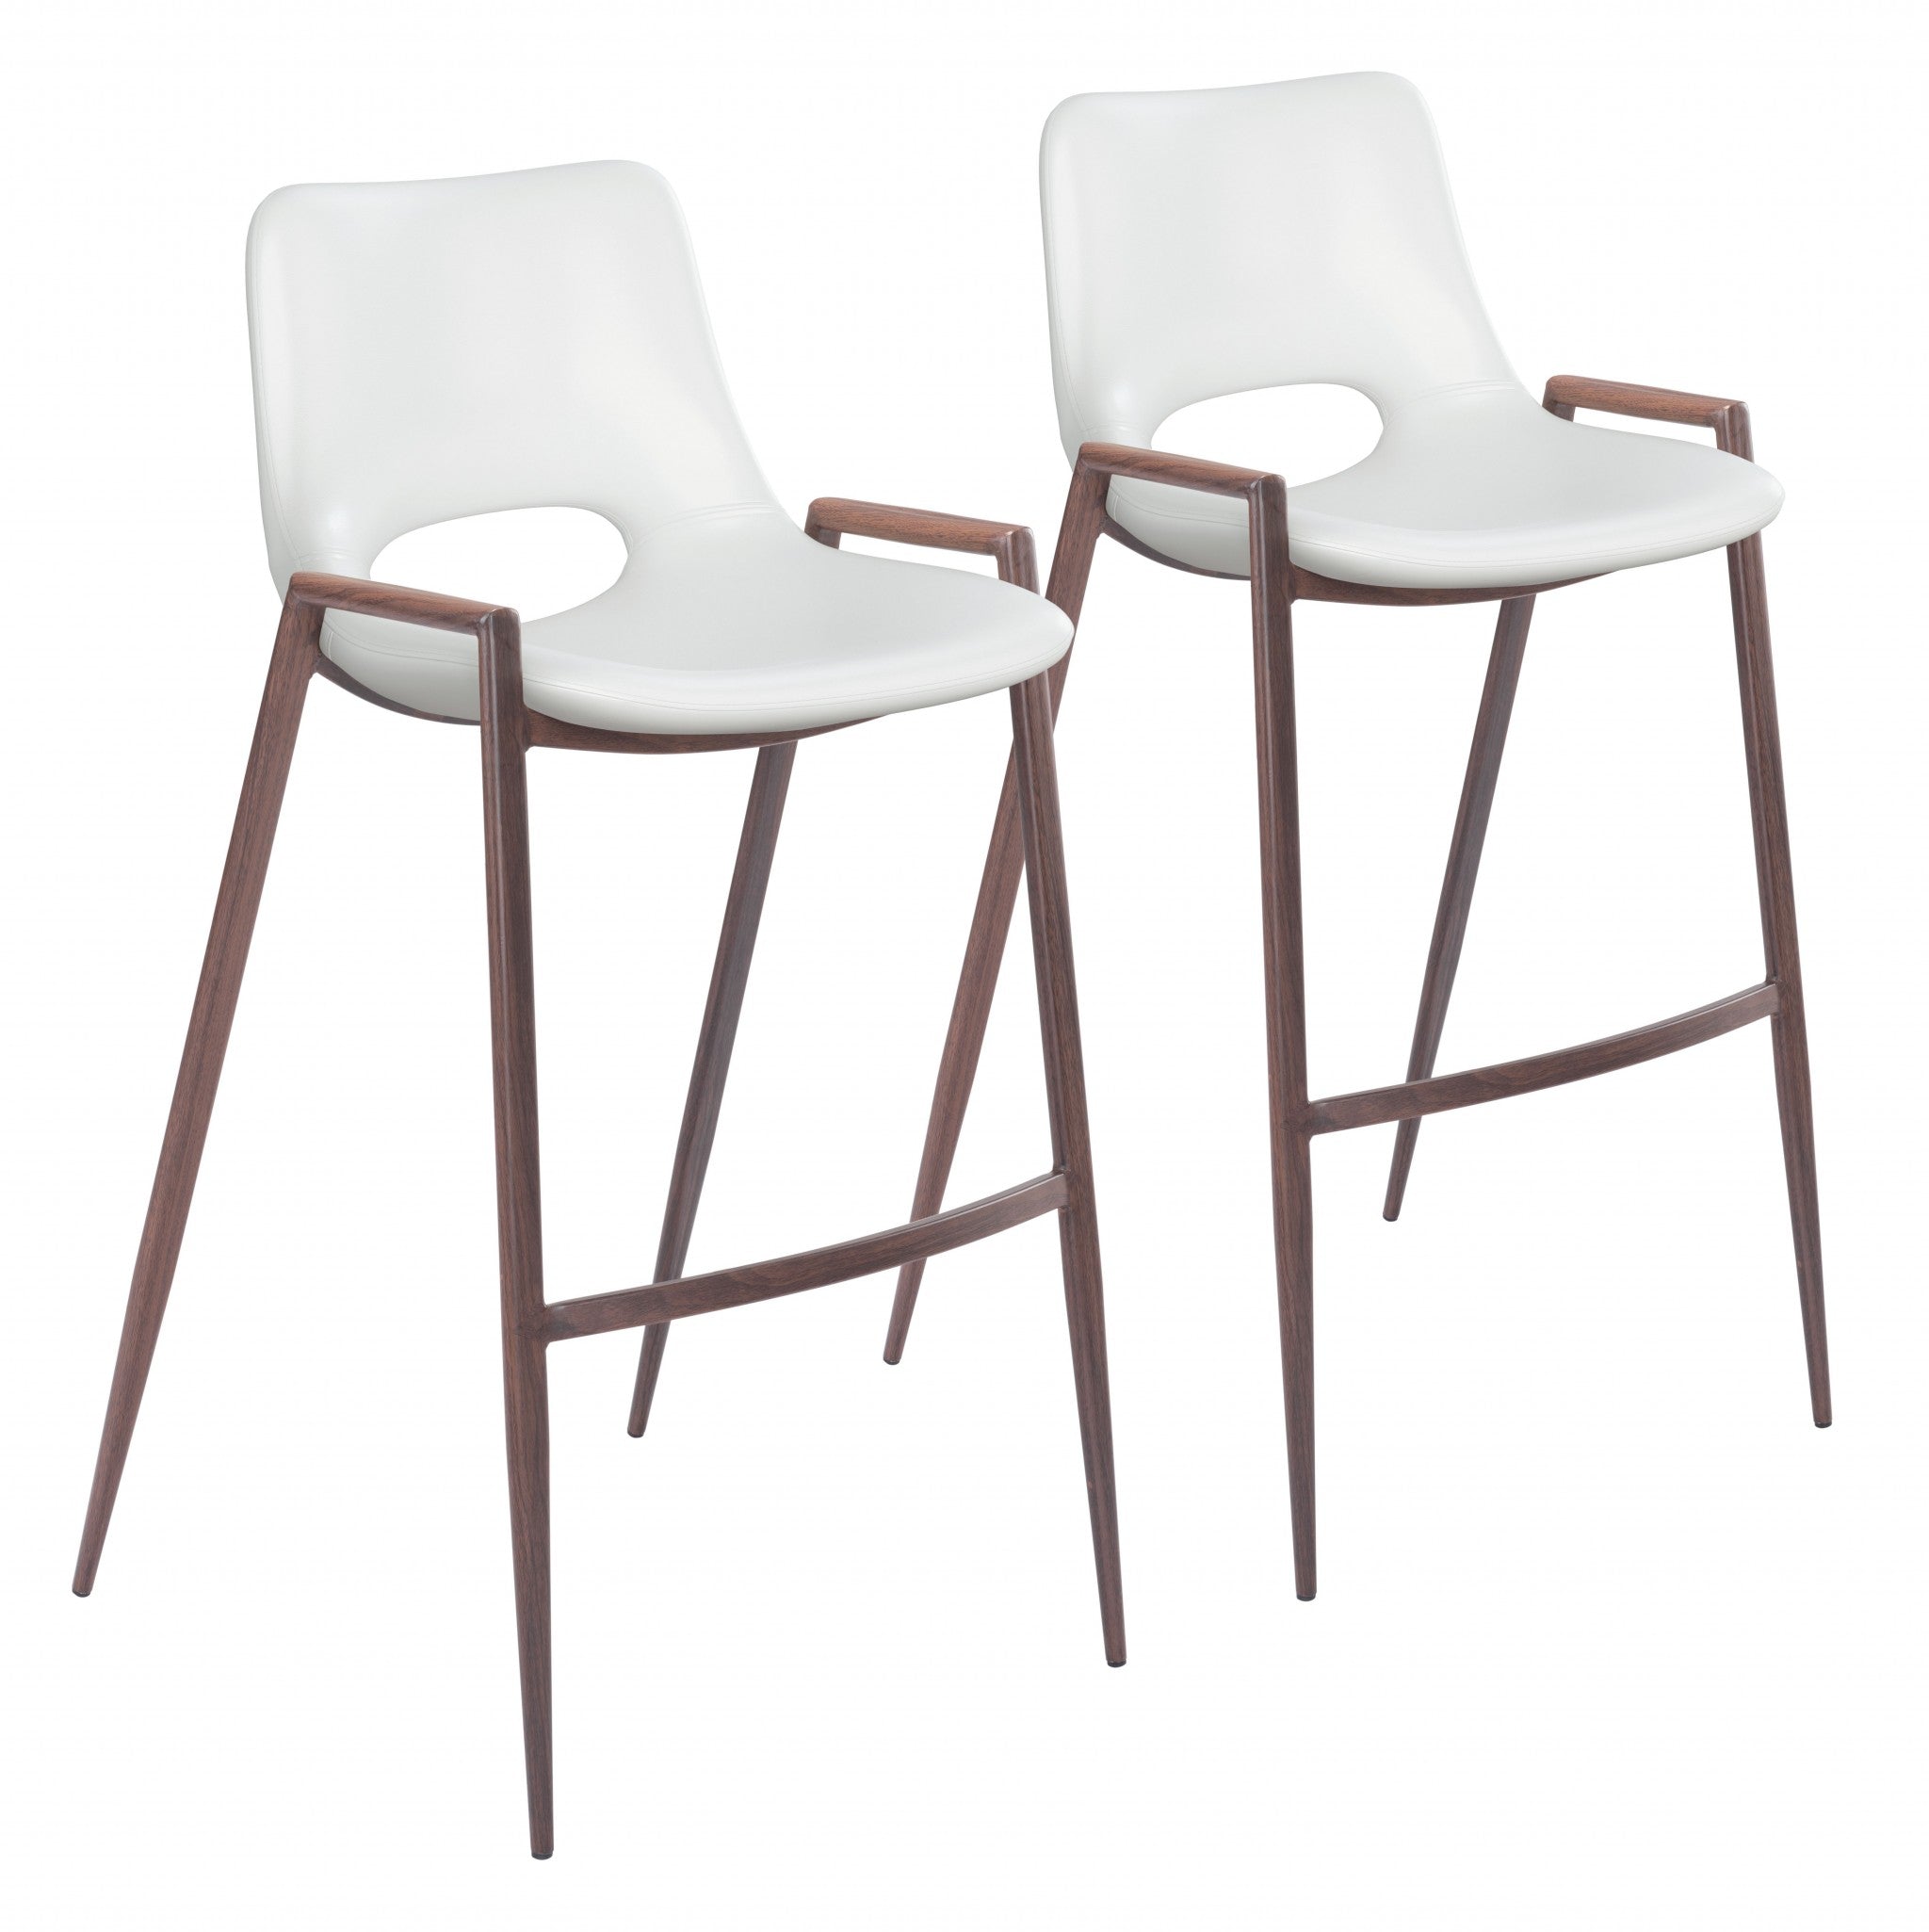 Set of Two 29" White And Brown Steel Low Back Bar Height Bar Chairs